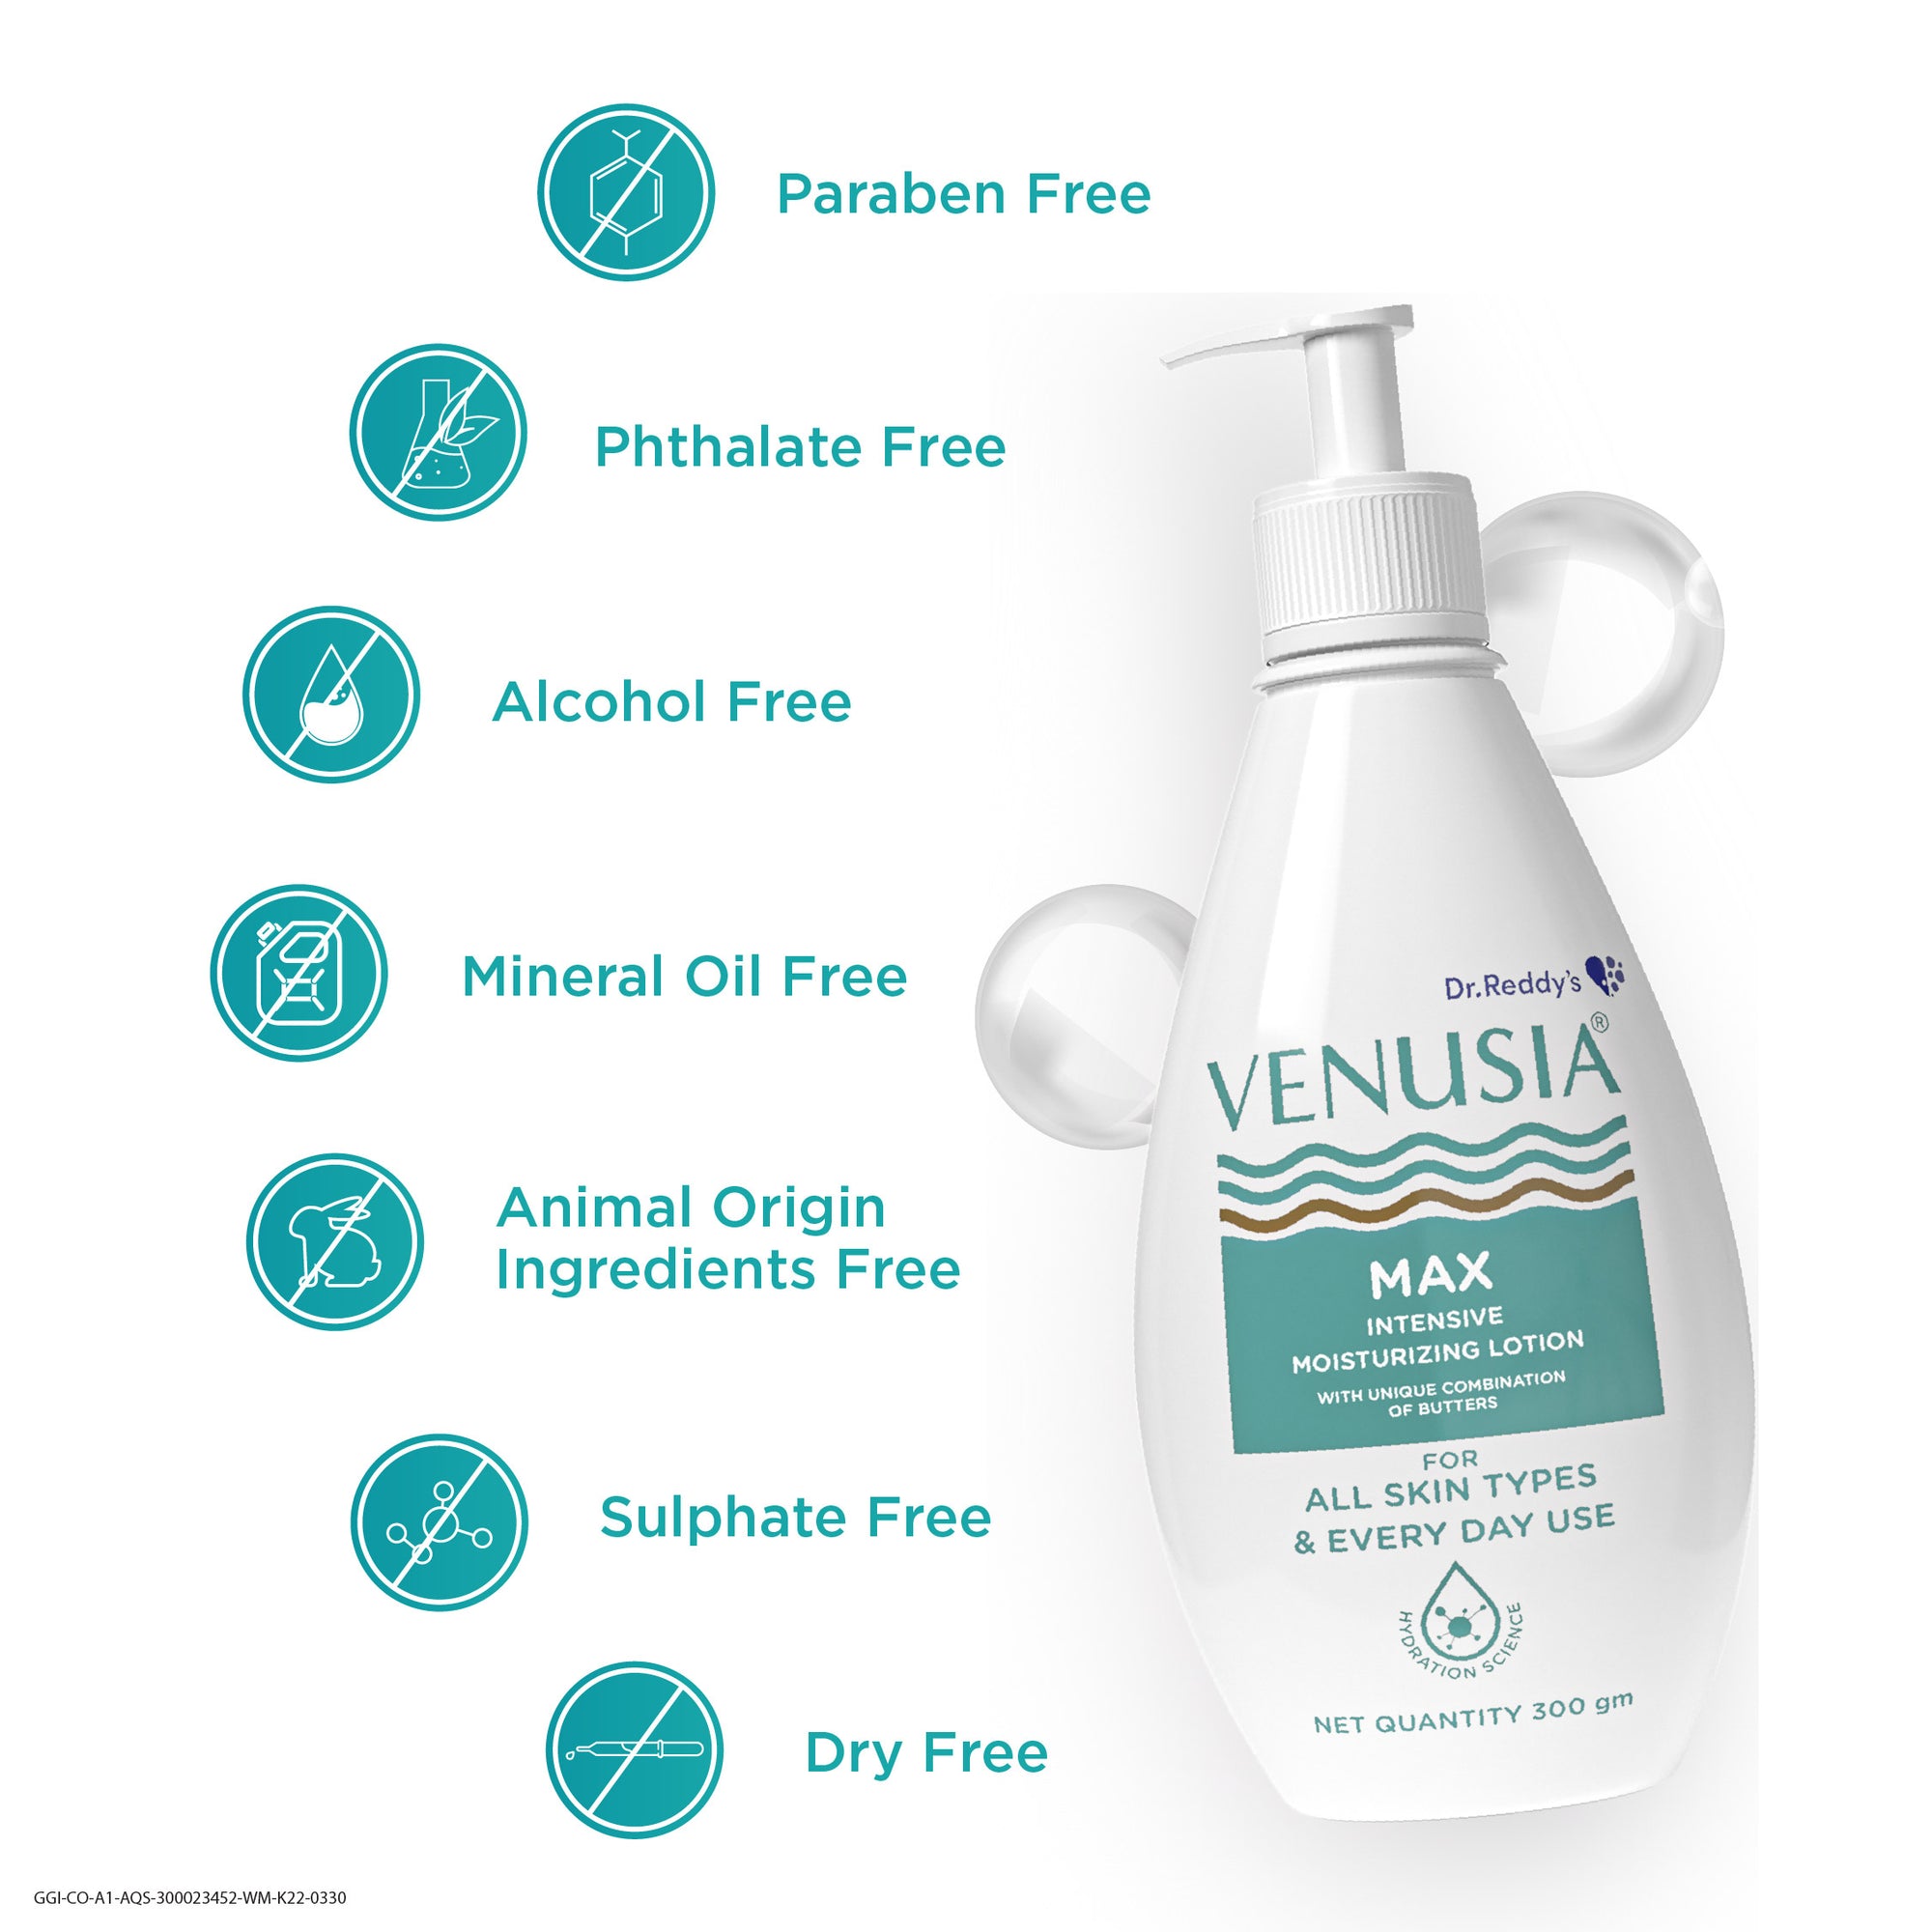 Dr. Reddy's Venusia Max Intensive Moisturizing Lotion, Repairs  Skin, Provides Soft & Smooth Skin, 300 GM